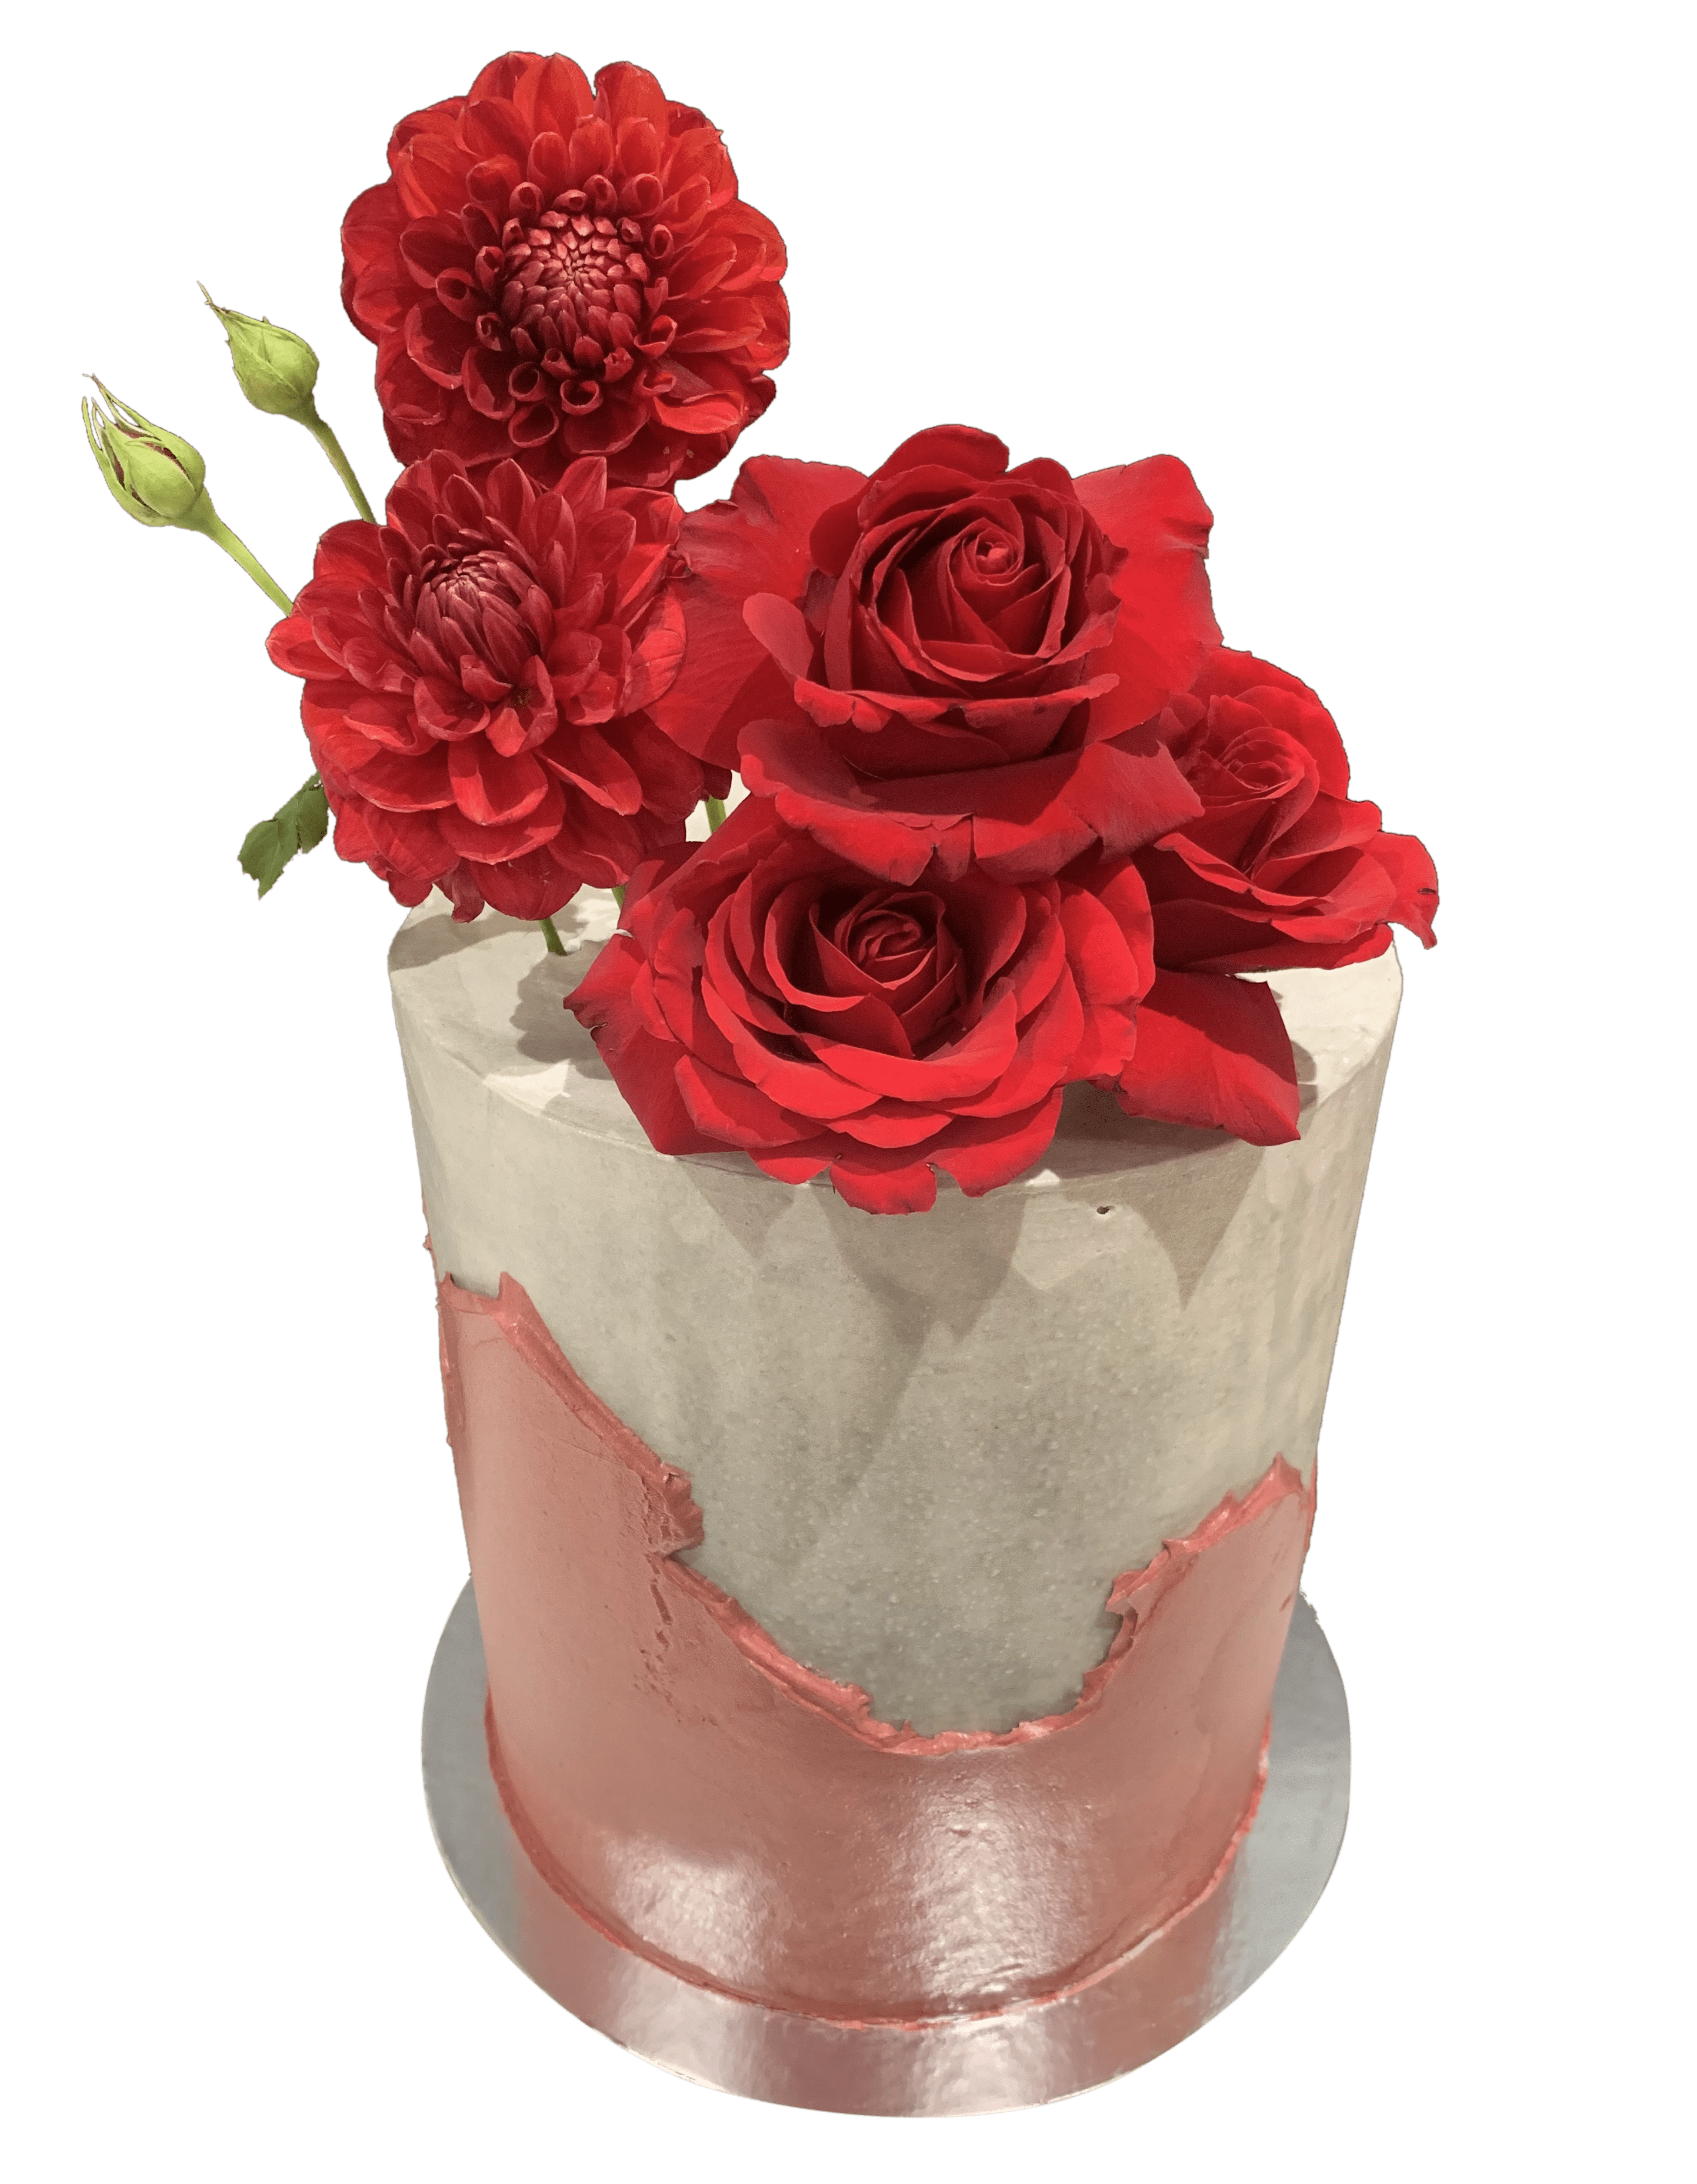 Cake Creations by Kate™ SpecialityCakes Concrete Buttercream with Textured Overlap Floral Double Height Speciality Cake